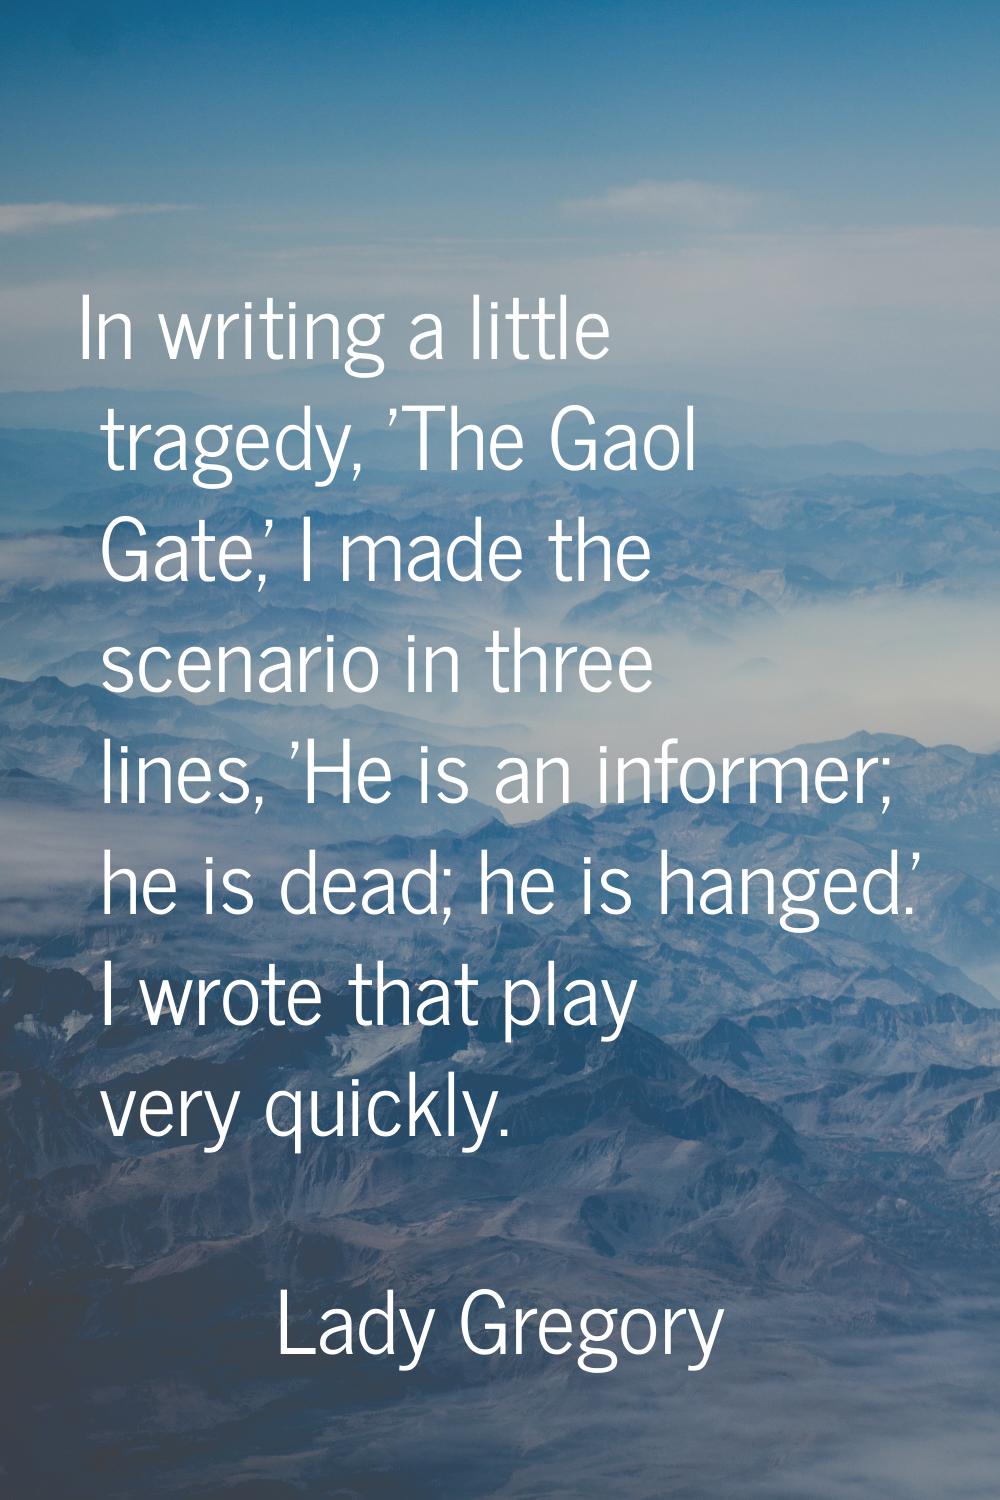 In writing a little tragedy, 'The Gaol Gate,' I made the scenario in three lines, 'He is an informe